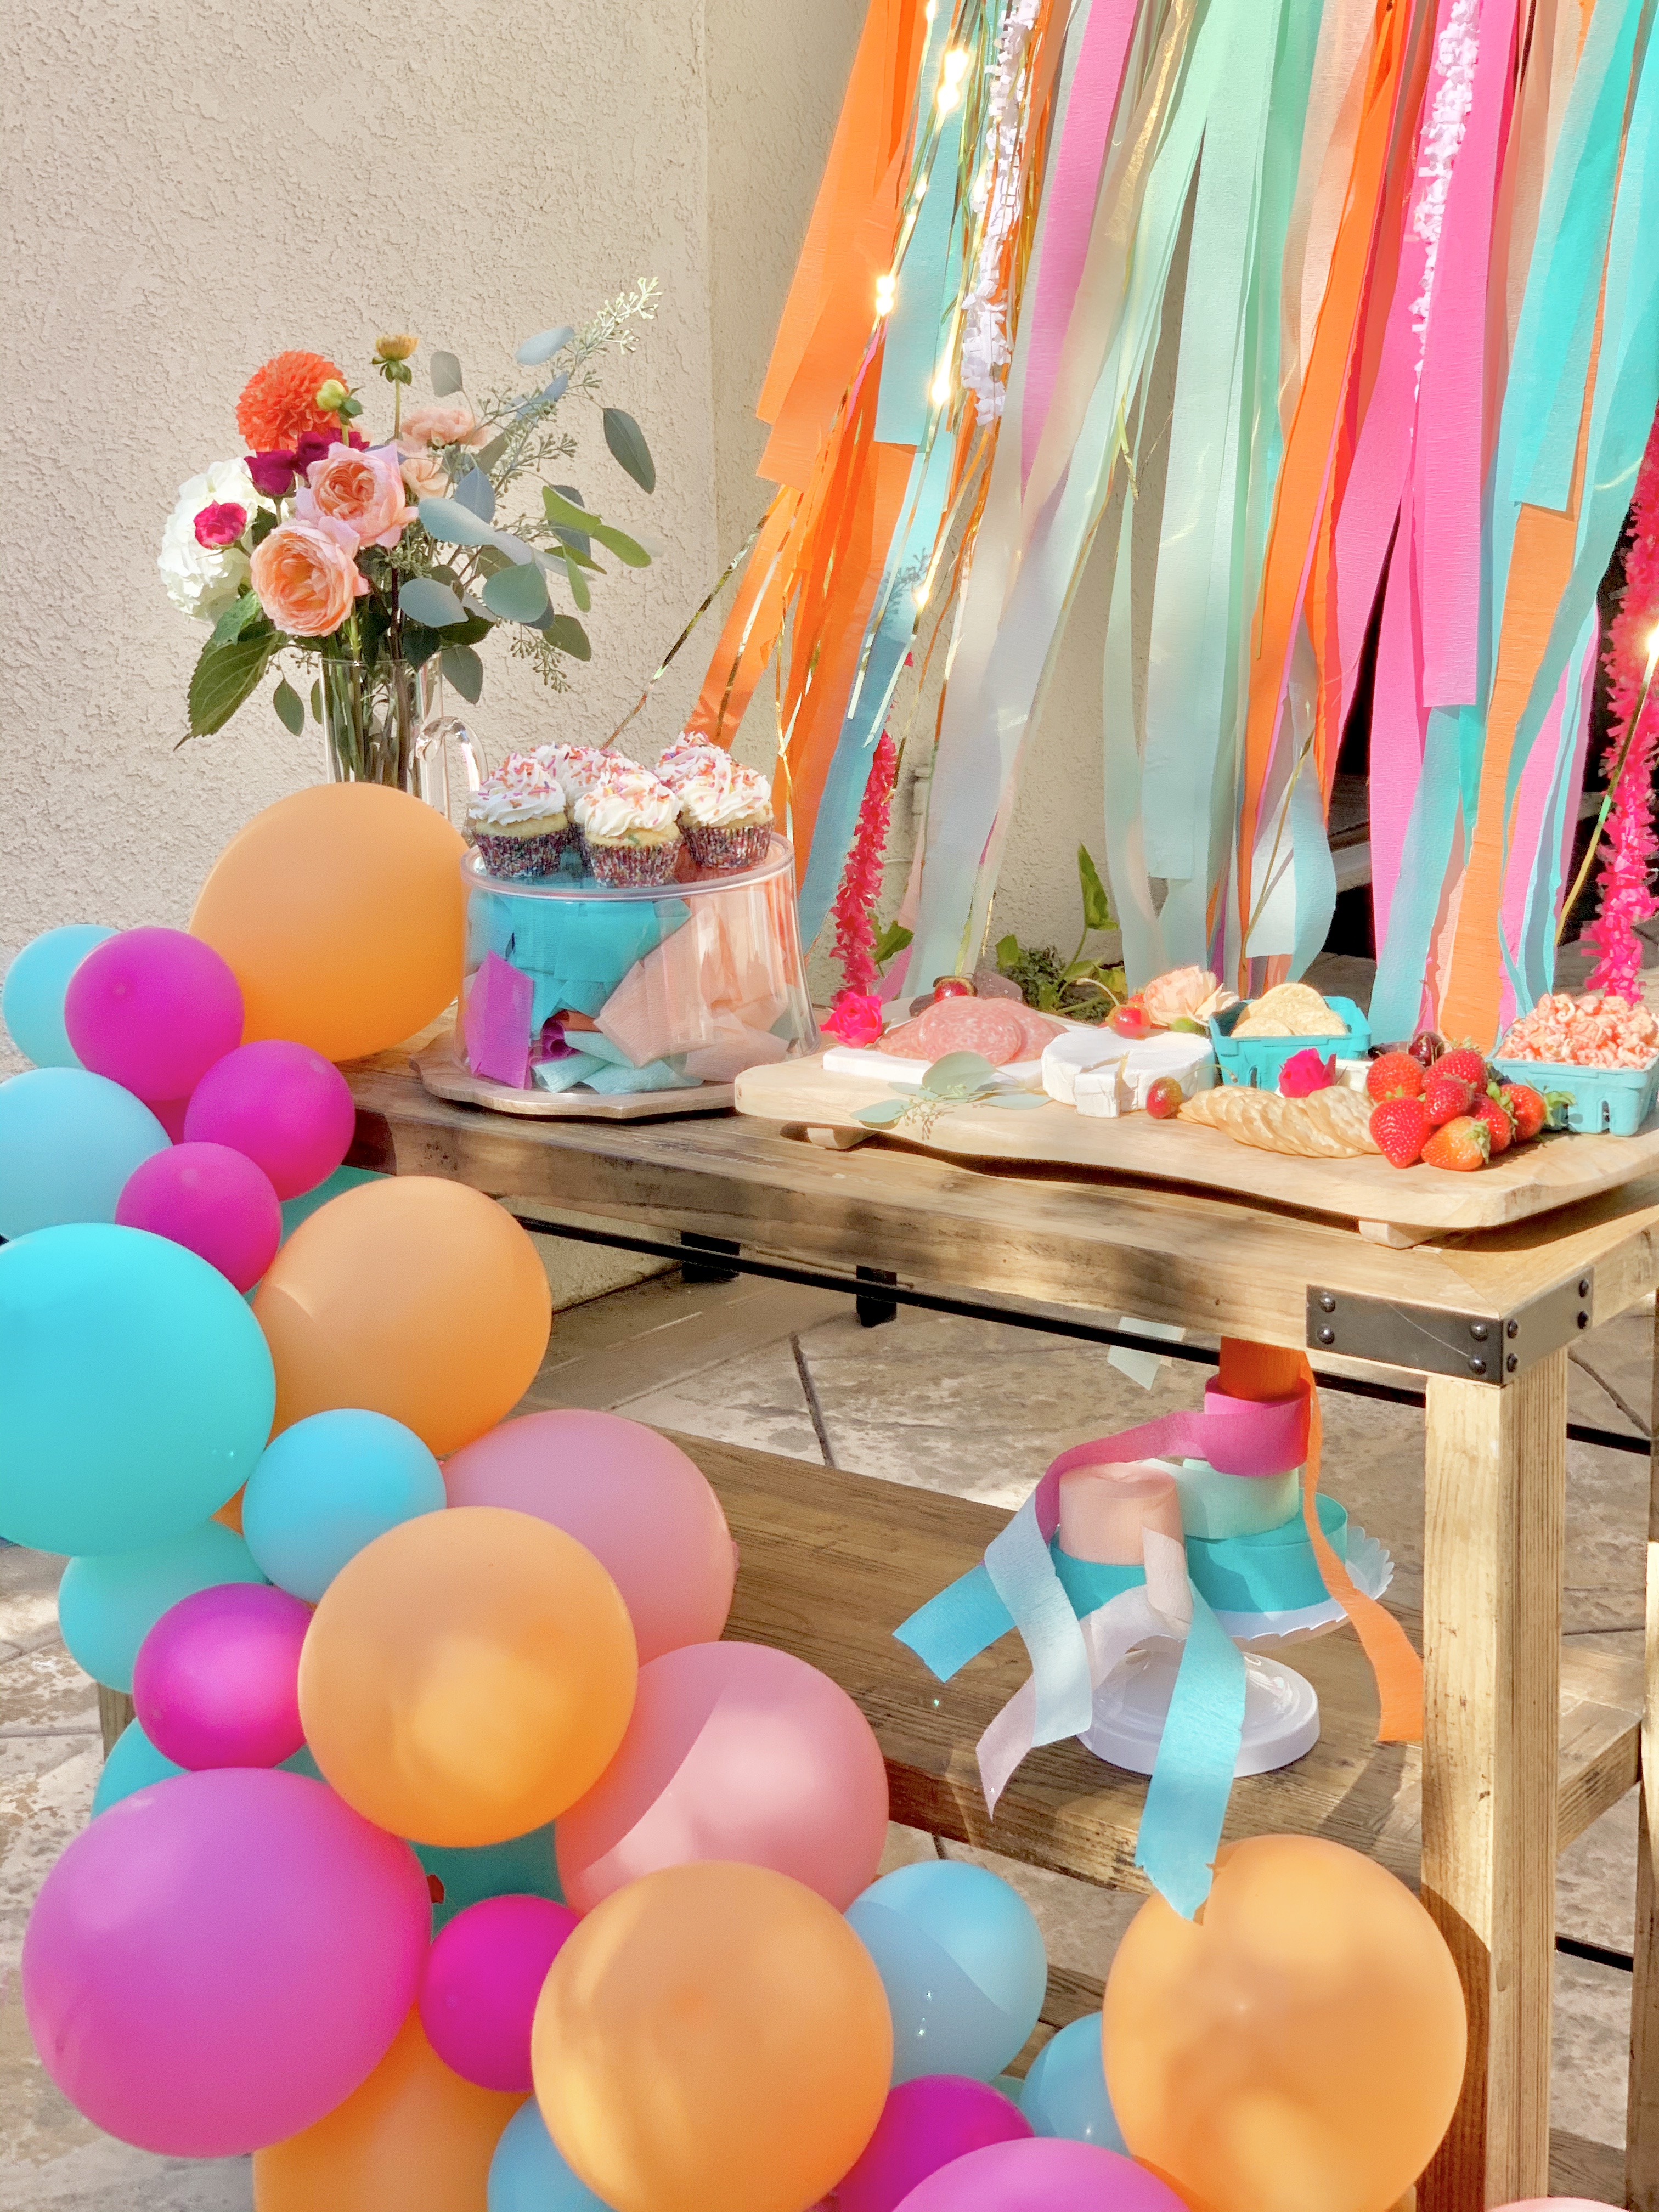 How to Make a Crepe Paper Streamer Party Backdrop 